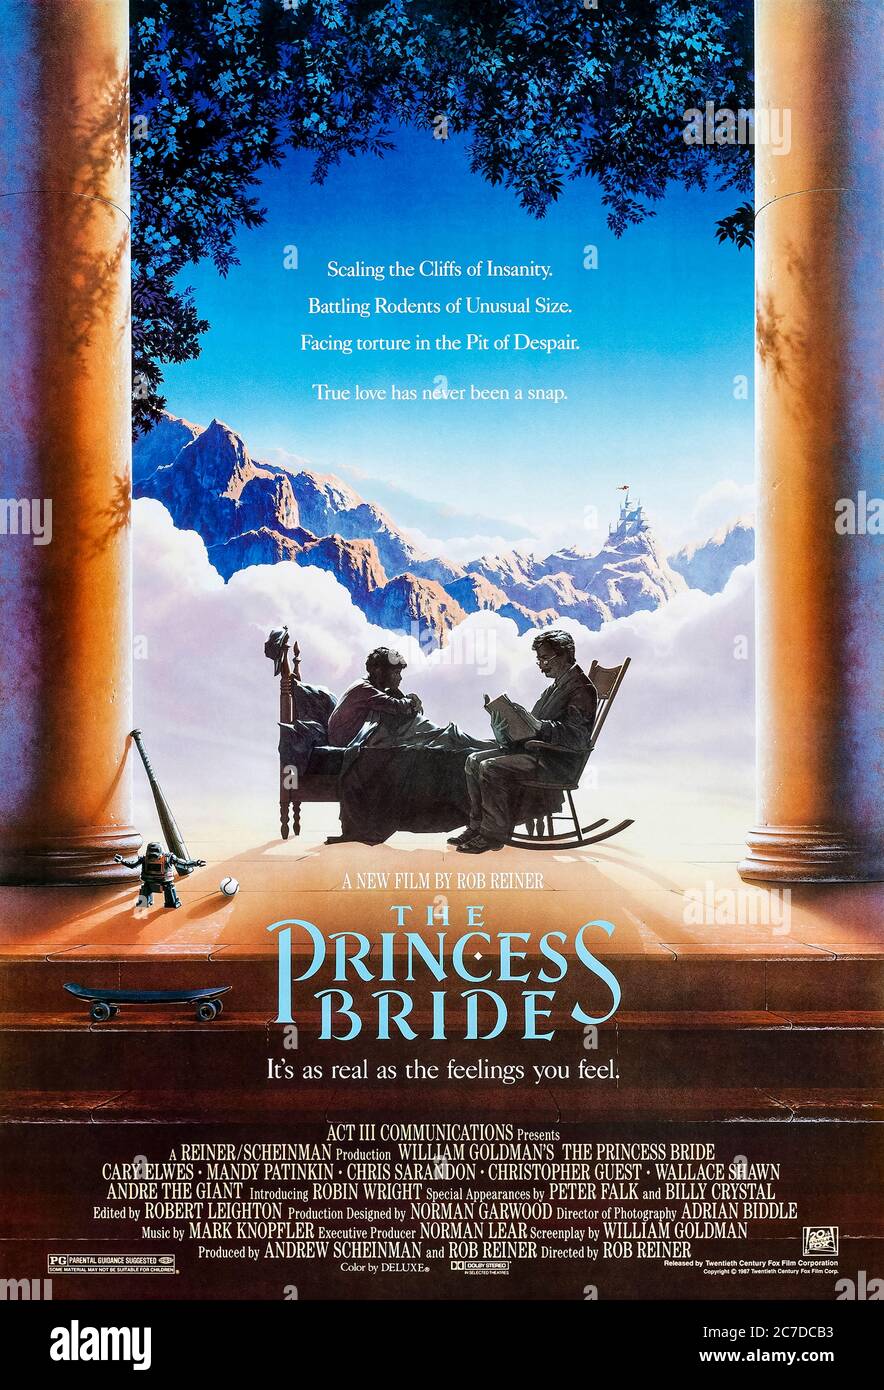 The Princess Bride (1987) directed by Rob Reiner and starring Cary Elwes, Mandy Patinkin, Robin Wright and Billy Crystal. William Goldman adapts his own book in this much loved postmodern fairy tale set in the land of Florin. Stock Photo